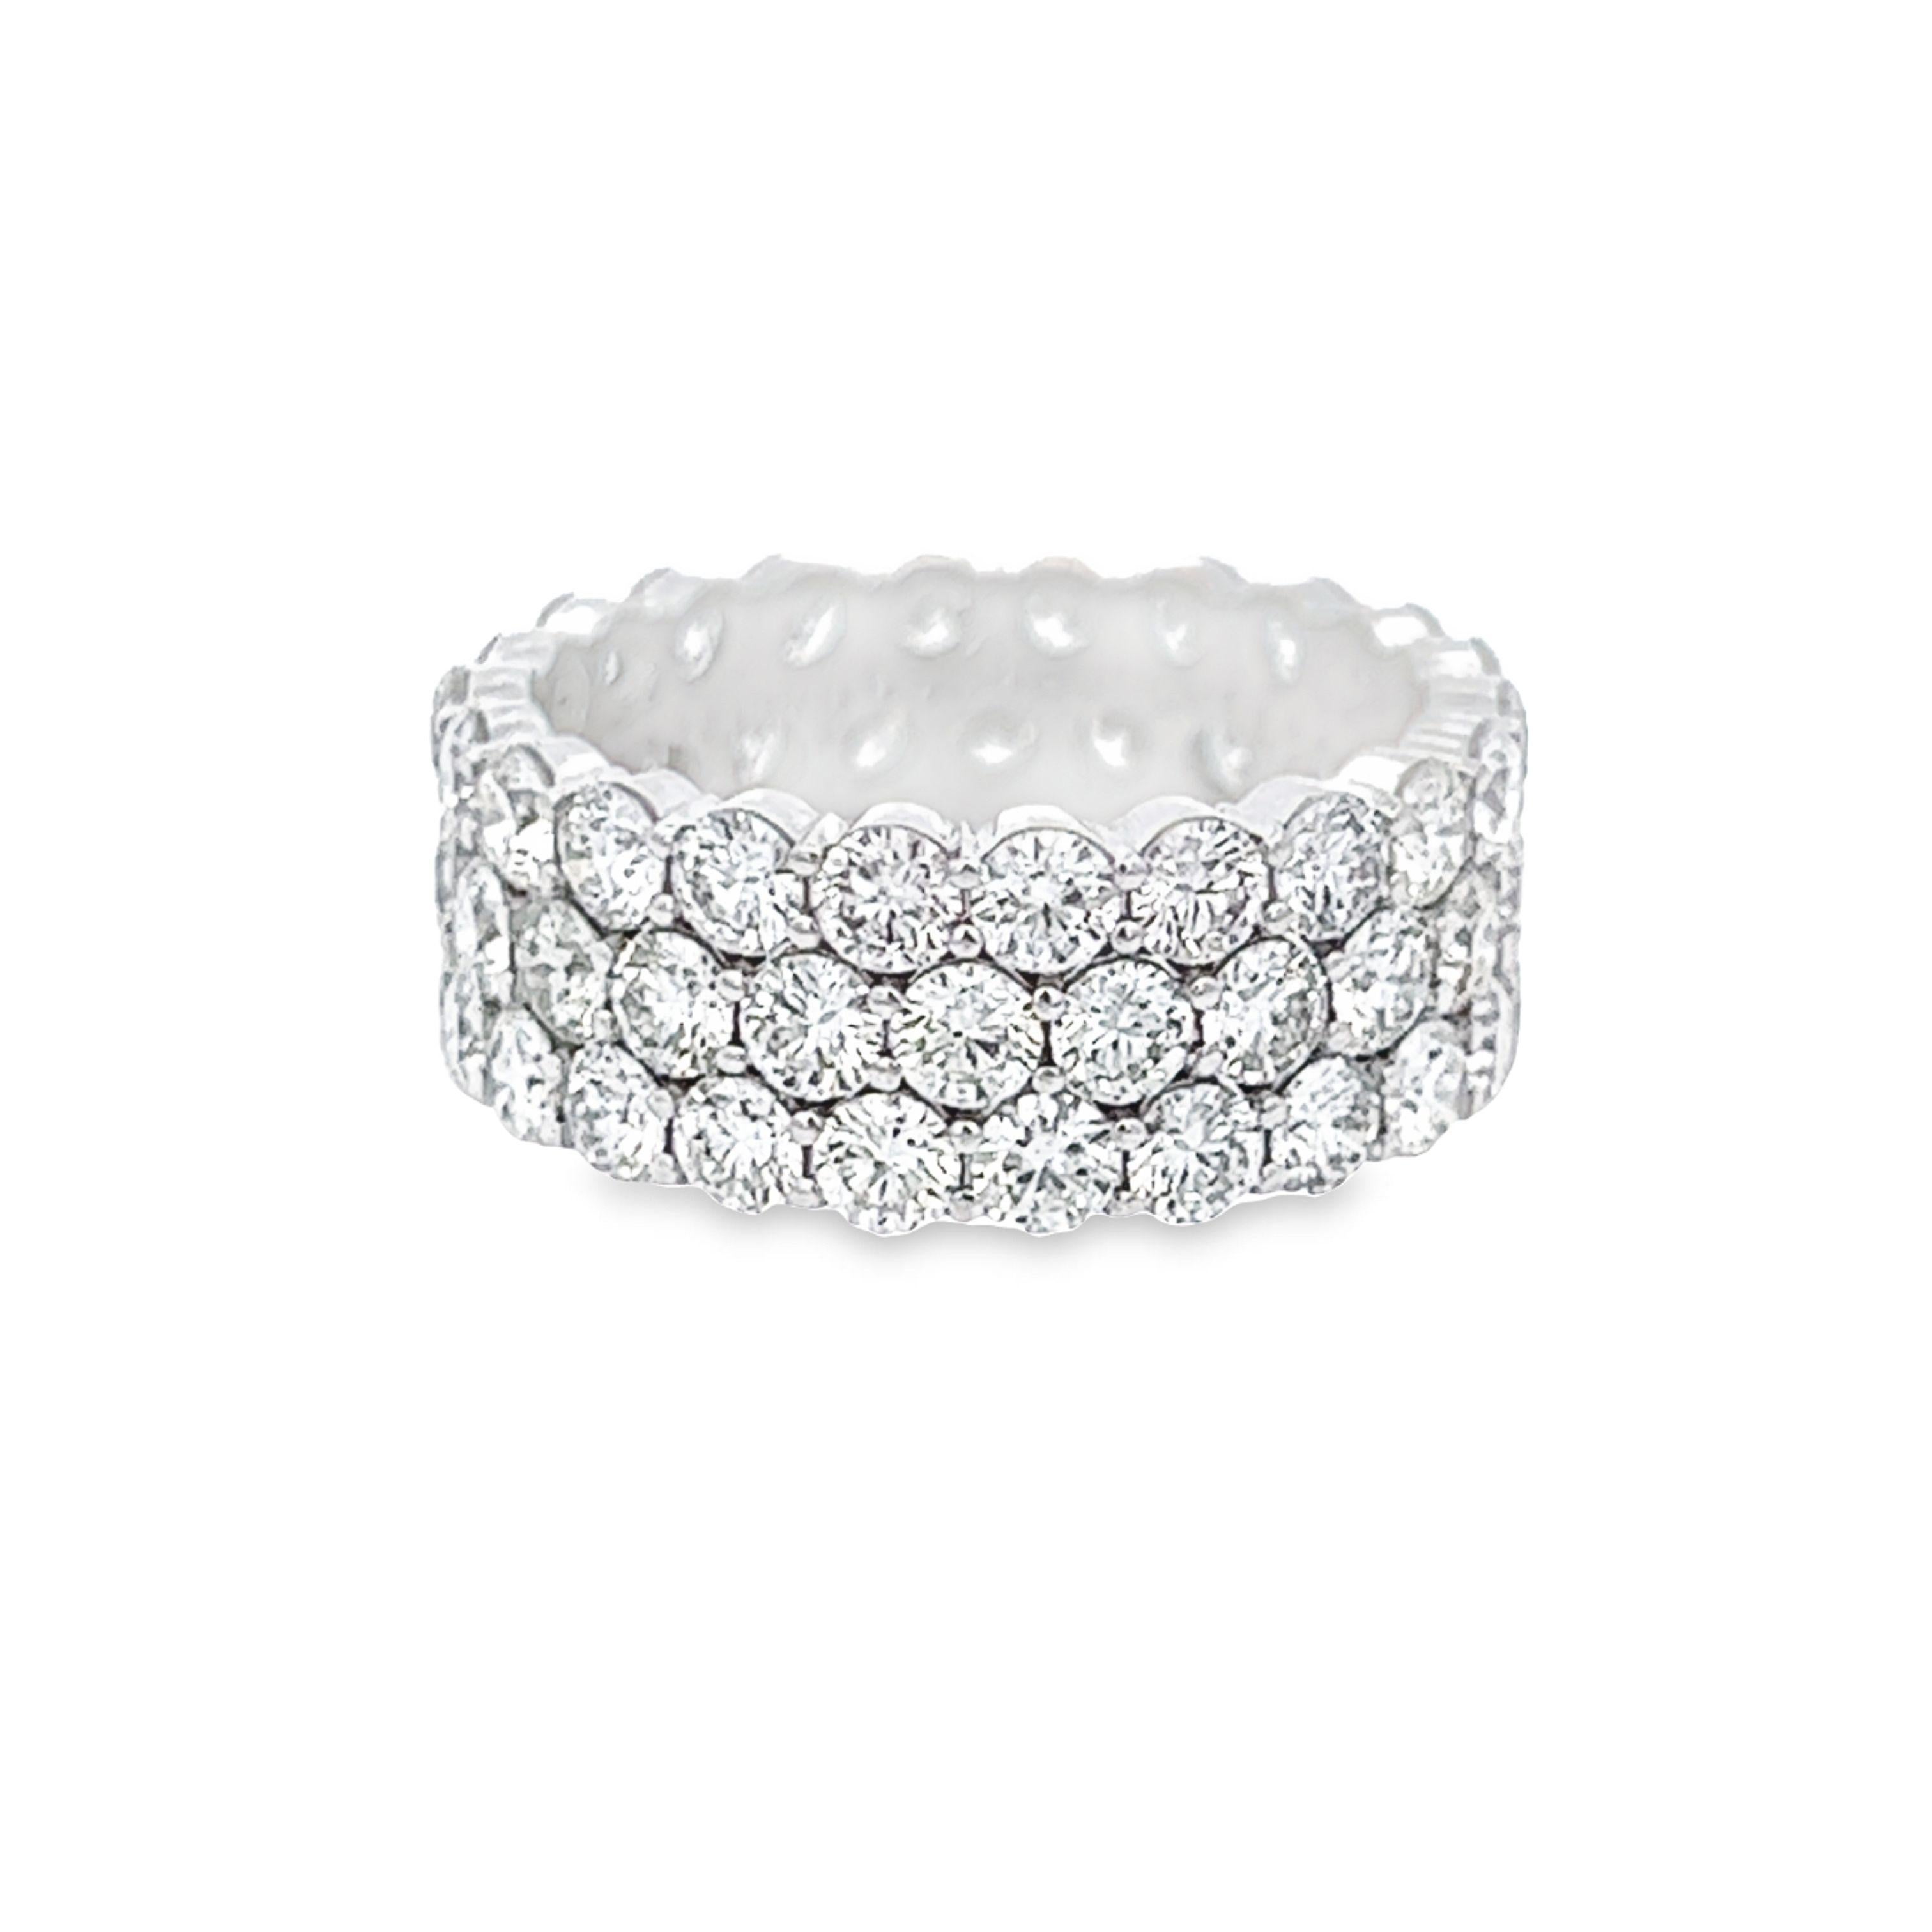 Stunning round diamond three-row eternity ring, by Alexander Beverly Hills.
66 round brilliant diamonds, 5.32 carats total. G/H color and VS clarity. Set in 18k white gold, 7.13 grams, size 6.5. 
Accommodated with an up-to-date digital appraisal by